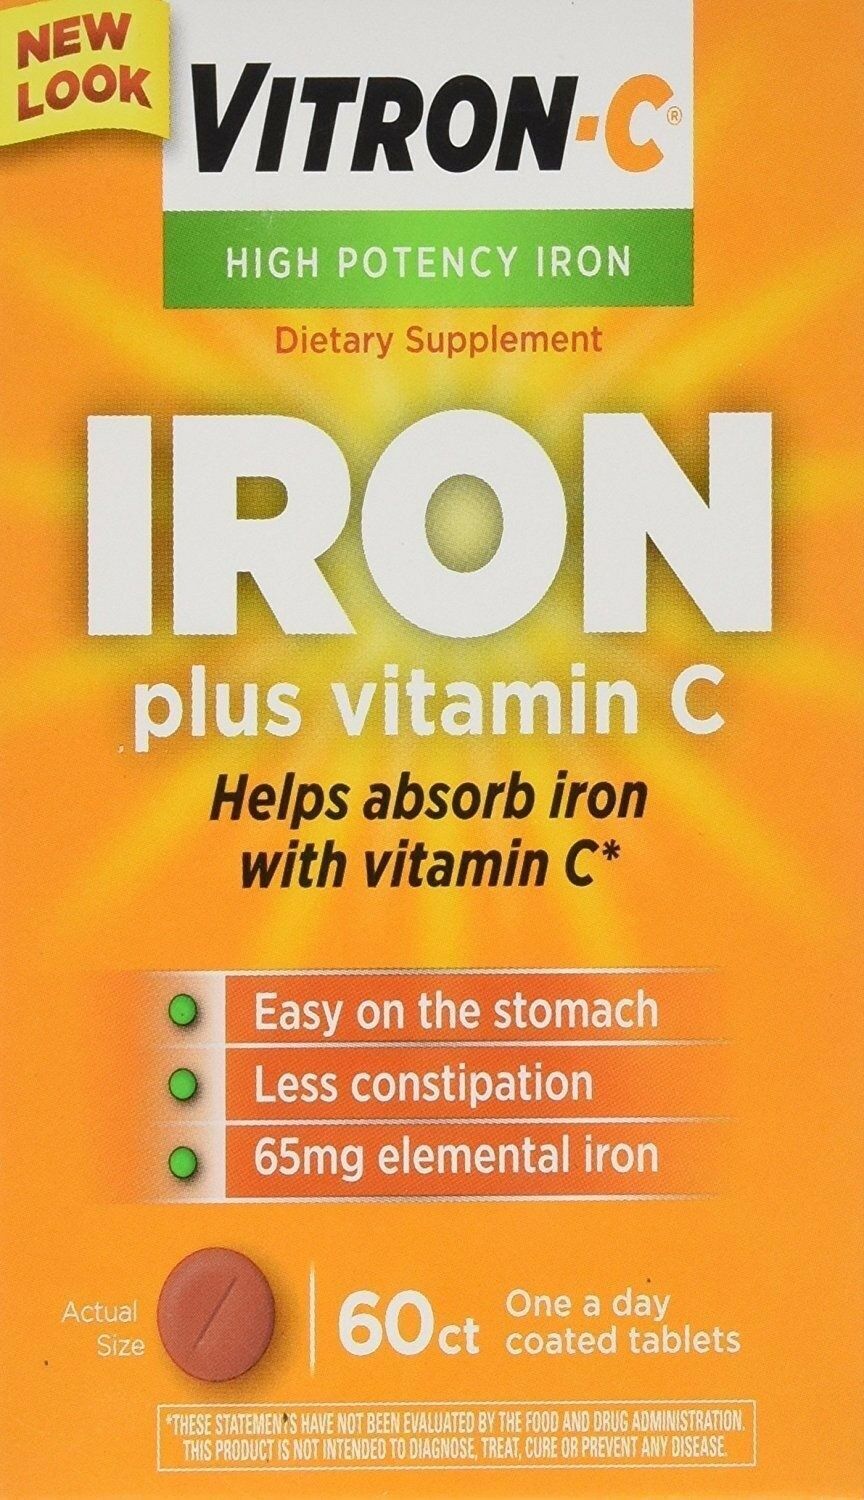 Vitron-C High Potency Iron Plus Vitamin C Coated Tablets Supplement 65mg 60 ct